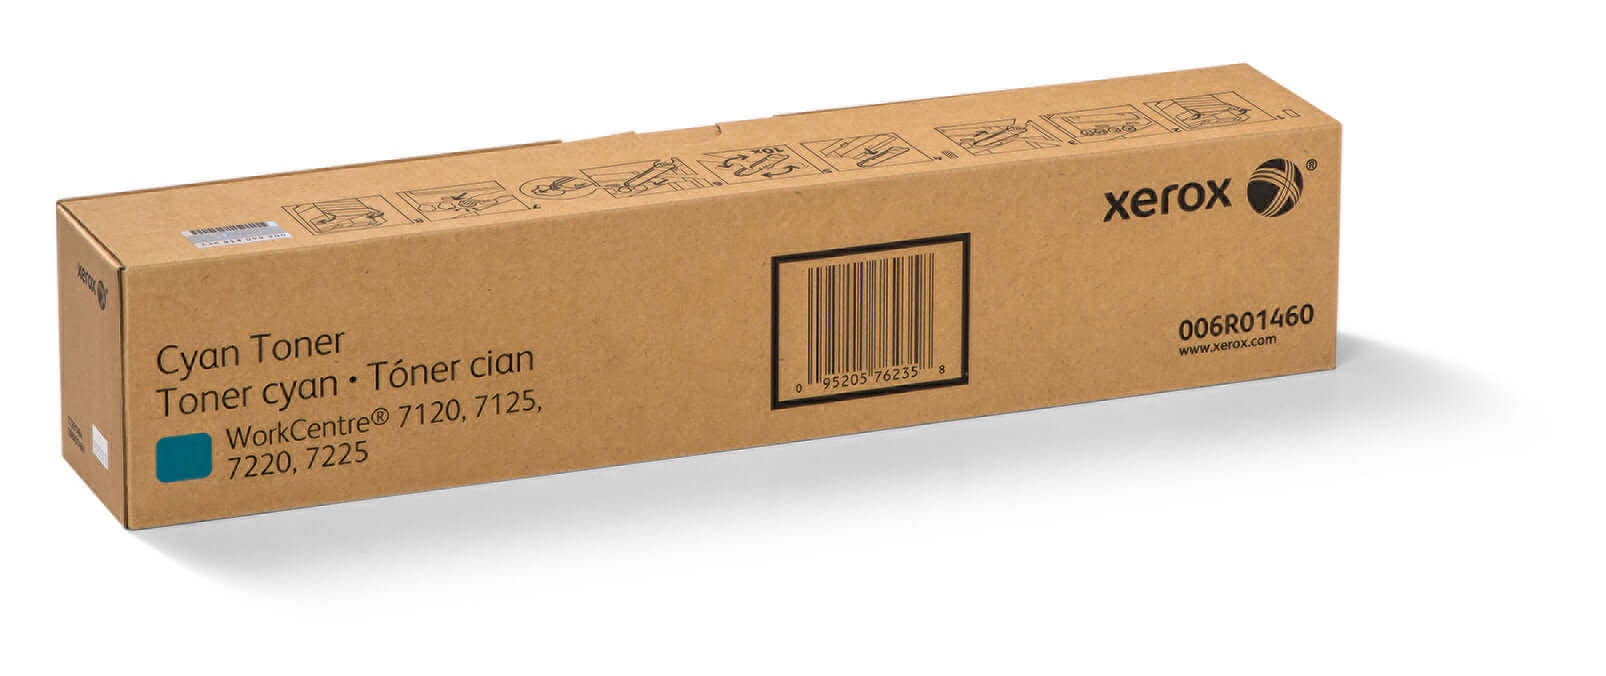 Xerox Cyan Toner Cartridge Sold (15,000) 006R01460 for WorkCentre 7120/7125/7220/7225/7220i/7225i